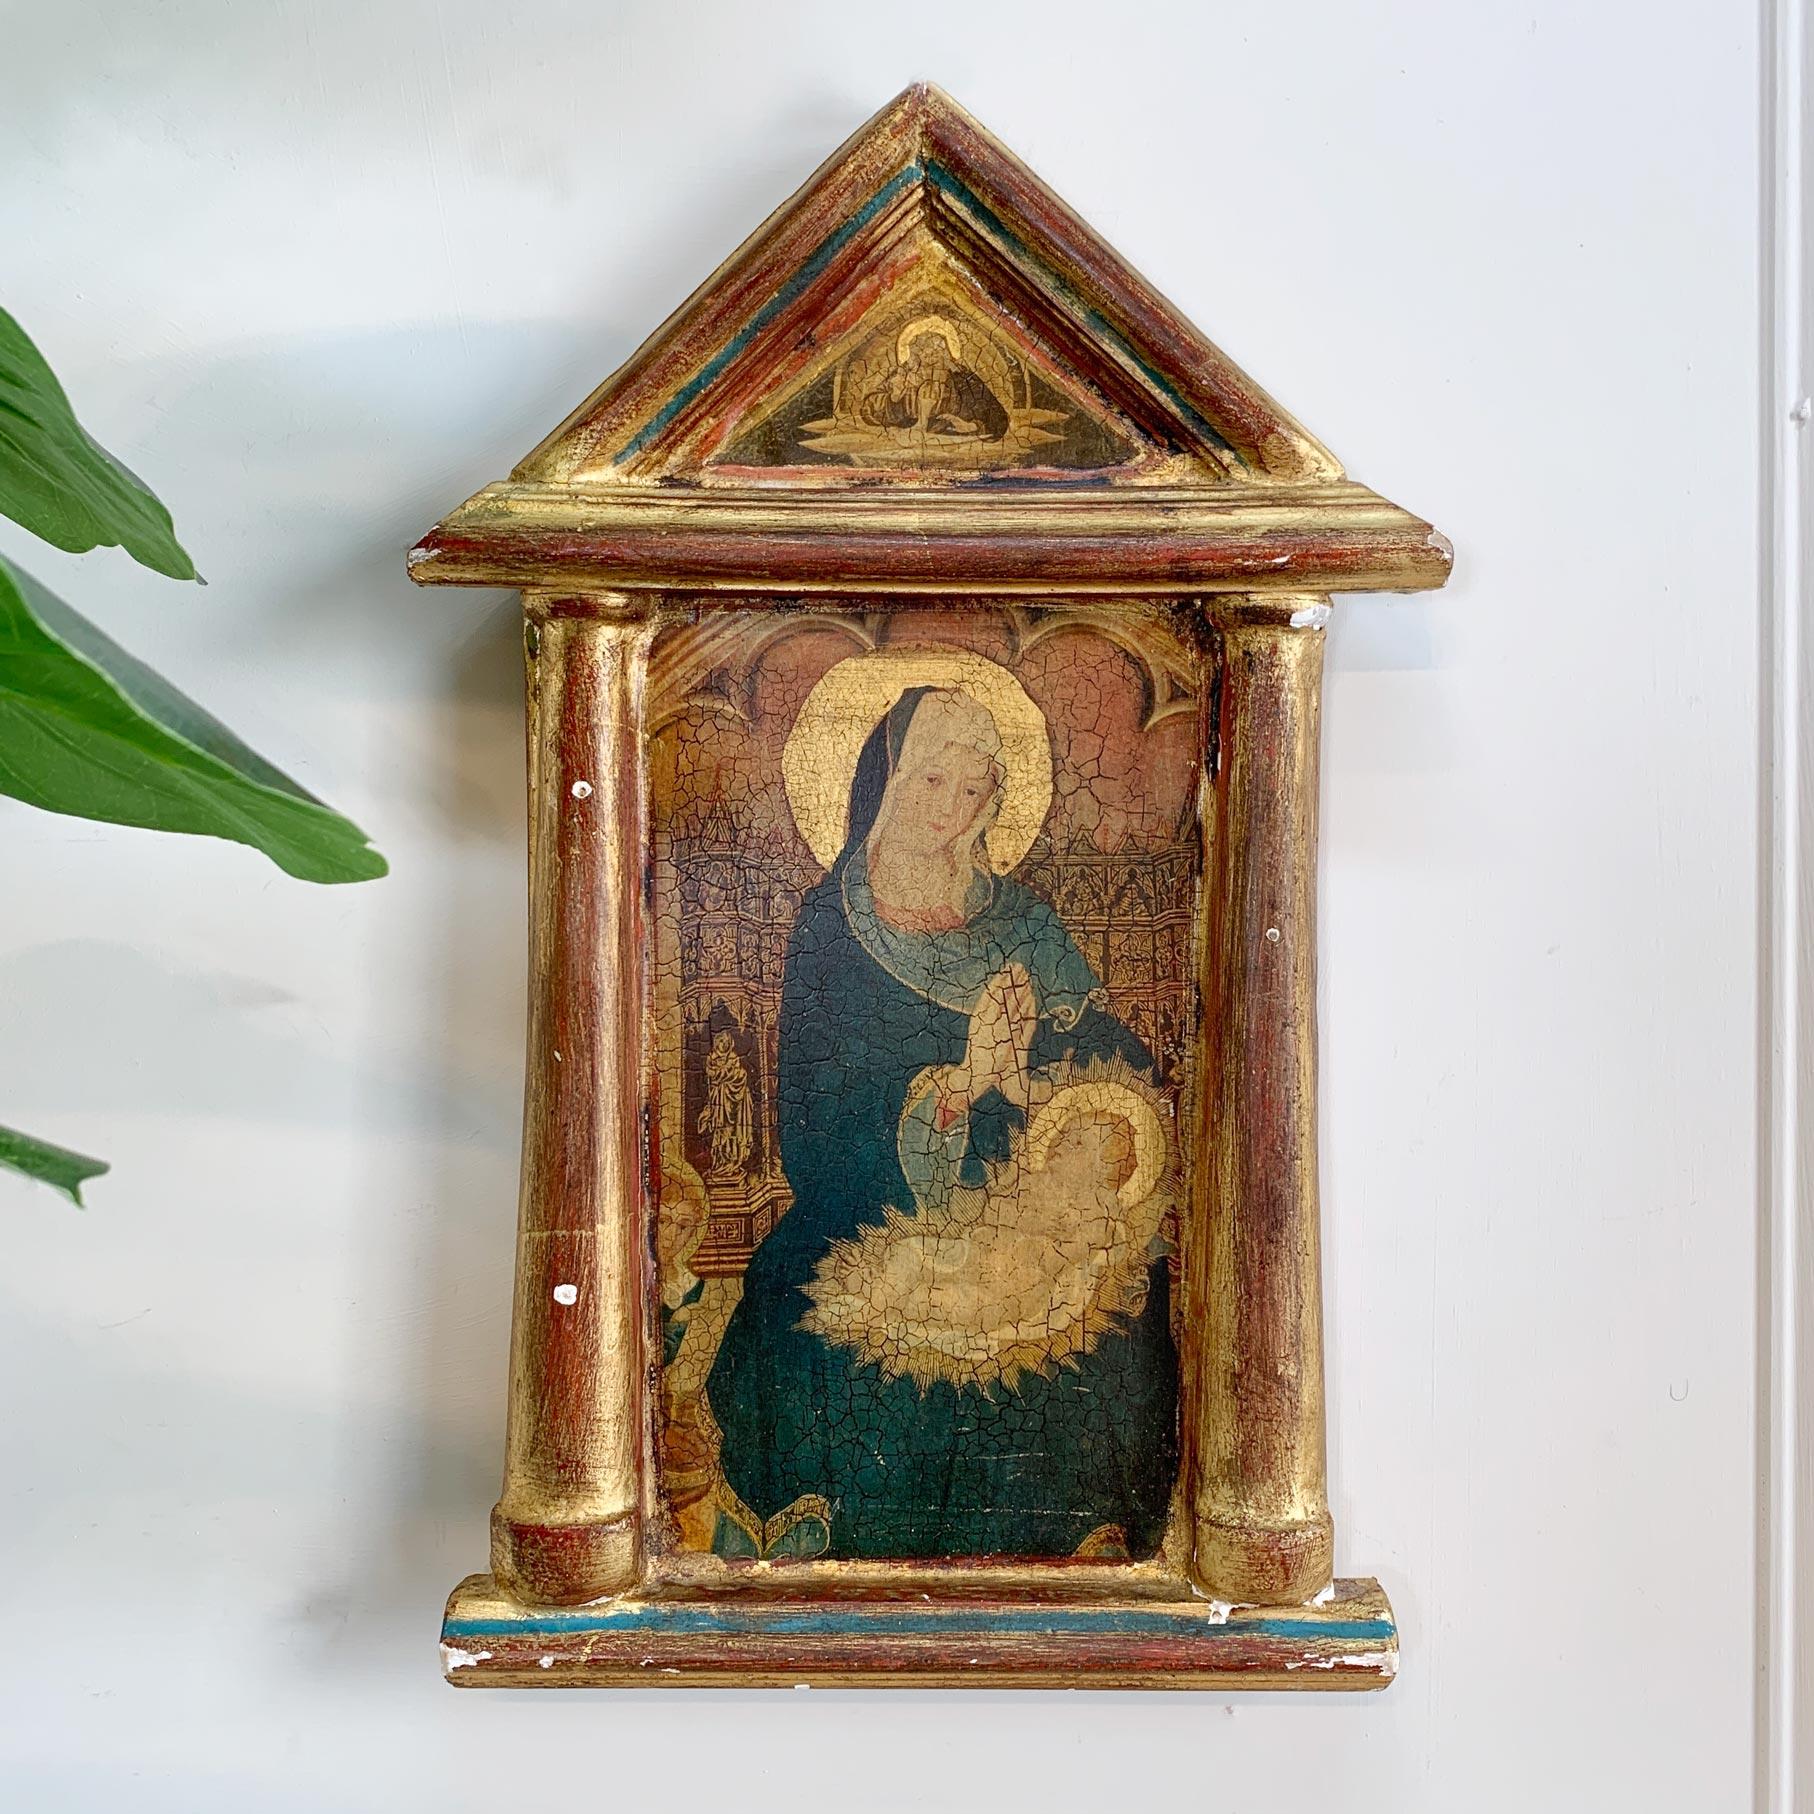 Late 19th century Icon painting on wood, the arched frame with applied gesso and gilt. The beautifully painted image is of The Virgin Mary, holding the infant Jesus.

We believe this is a Greek Orthodox Icon, although it could possibly be